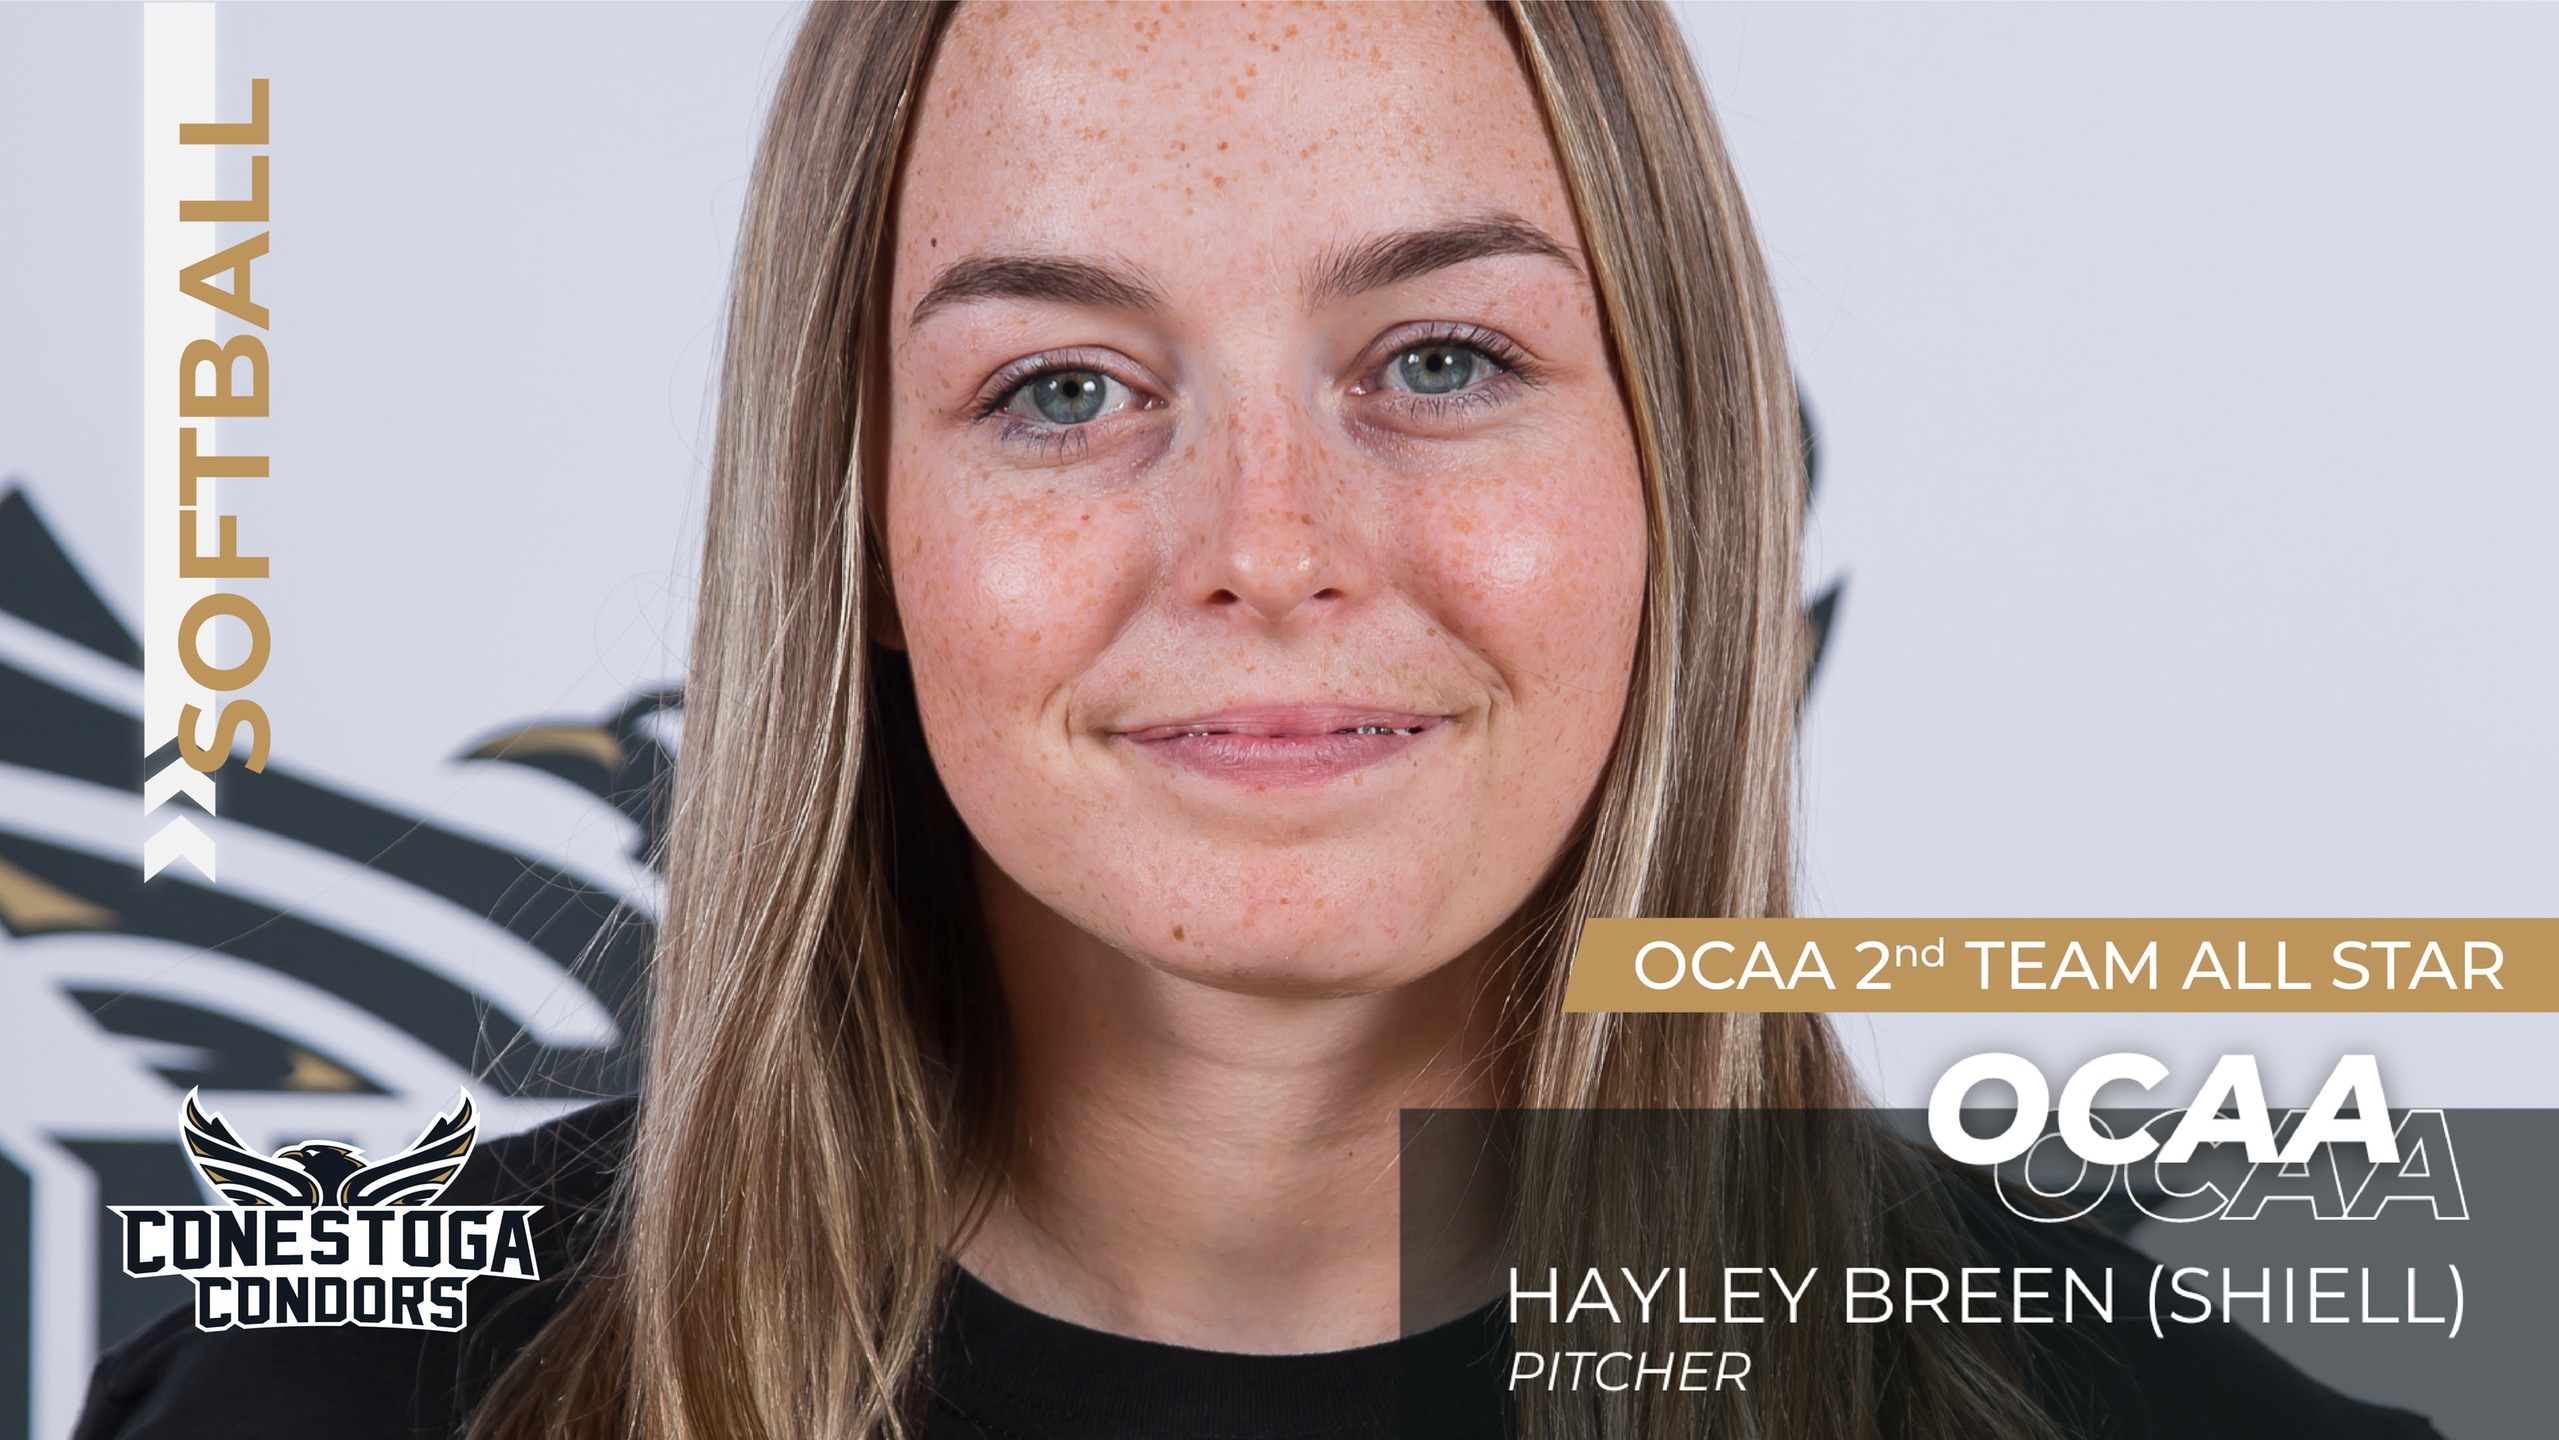 Congratulations to our Softball athlete, Hayley Breen, for being selected as an OCAA 2nd Team All Star